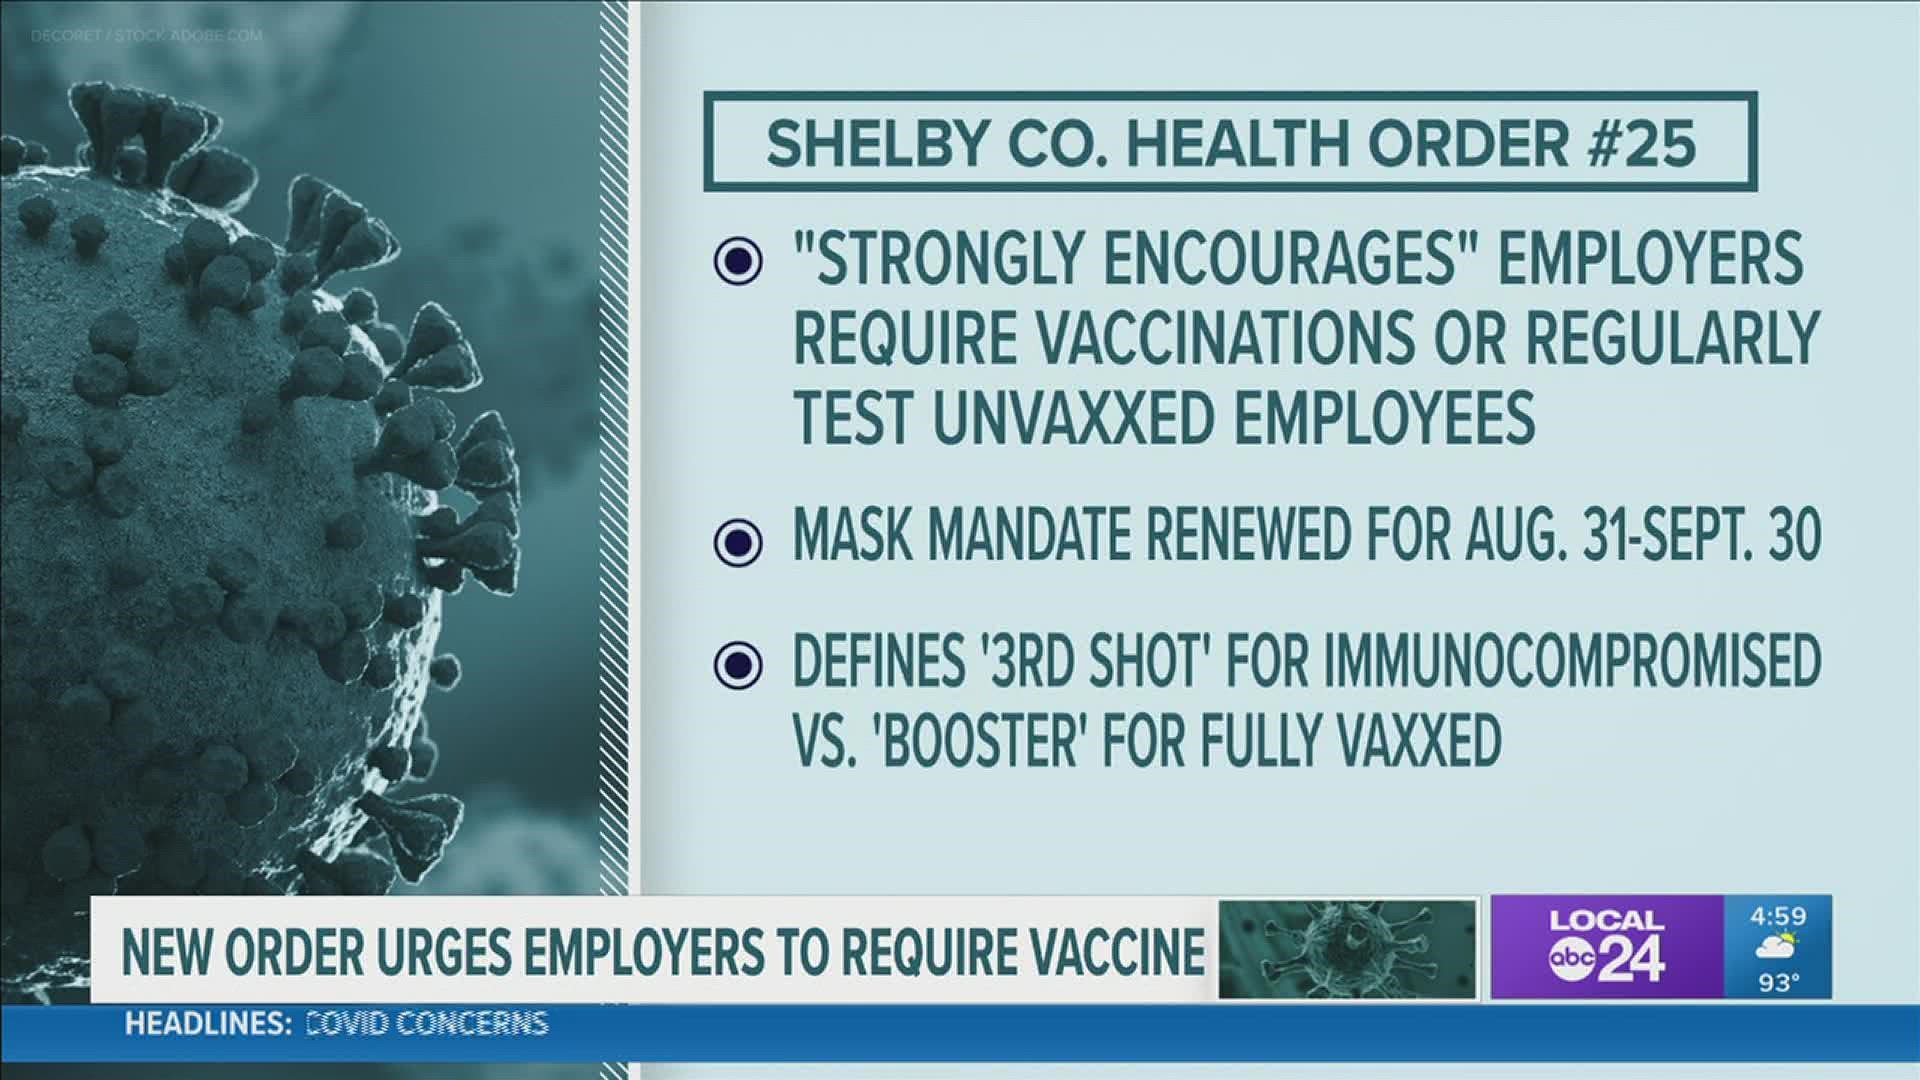 The order also recommends regular COVID-19 testing for all unvaccinated employees, including those who are asymptomatic.